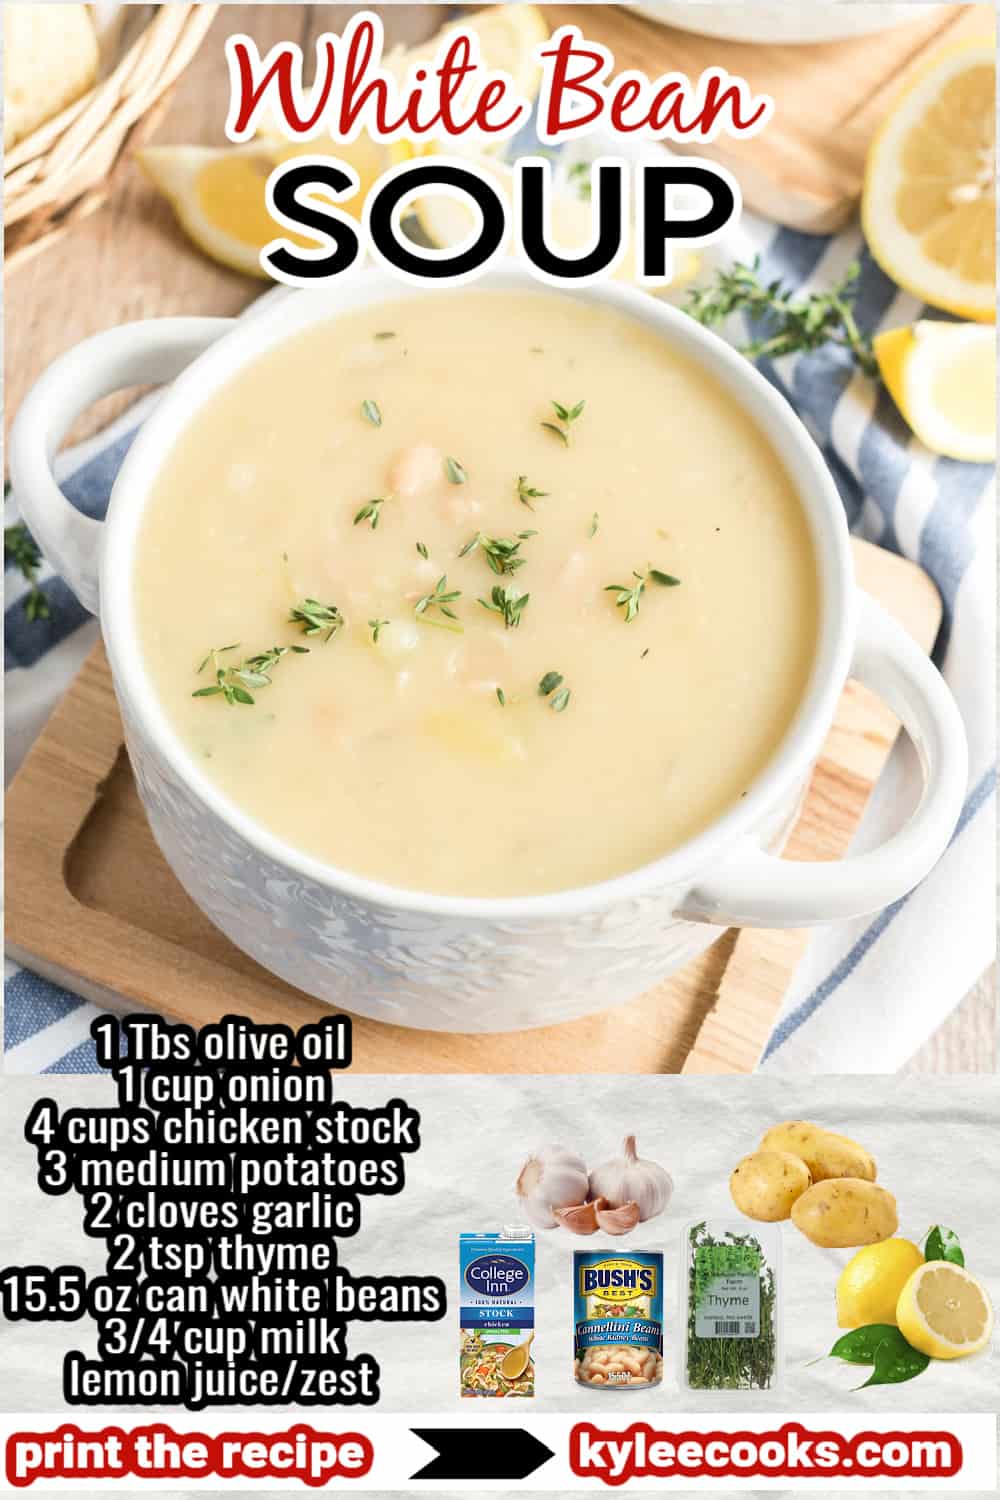 white bean soup in a bowl with ingredients and title overlaid in text